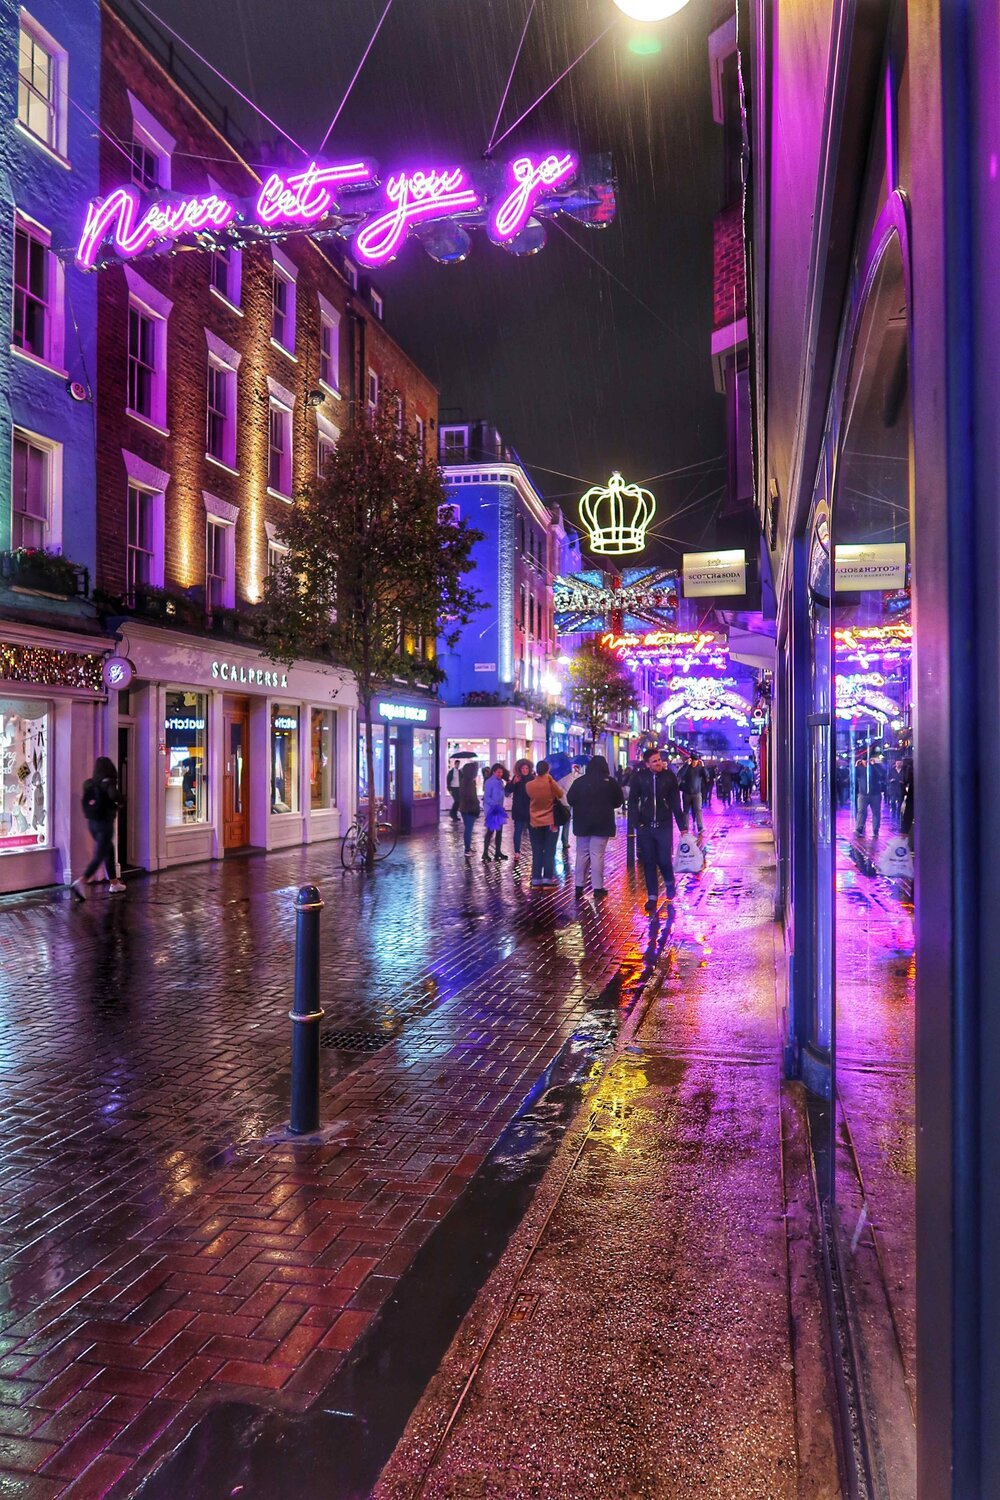 Lit up at night, Carnaby is a beautiful spot in London, England.